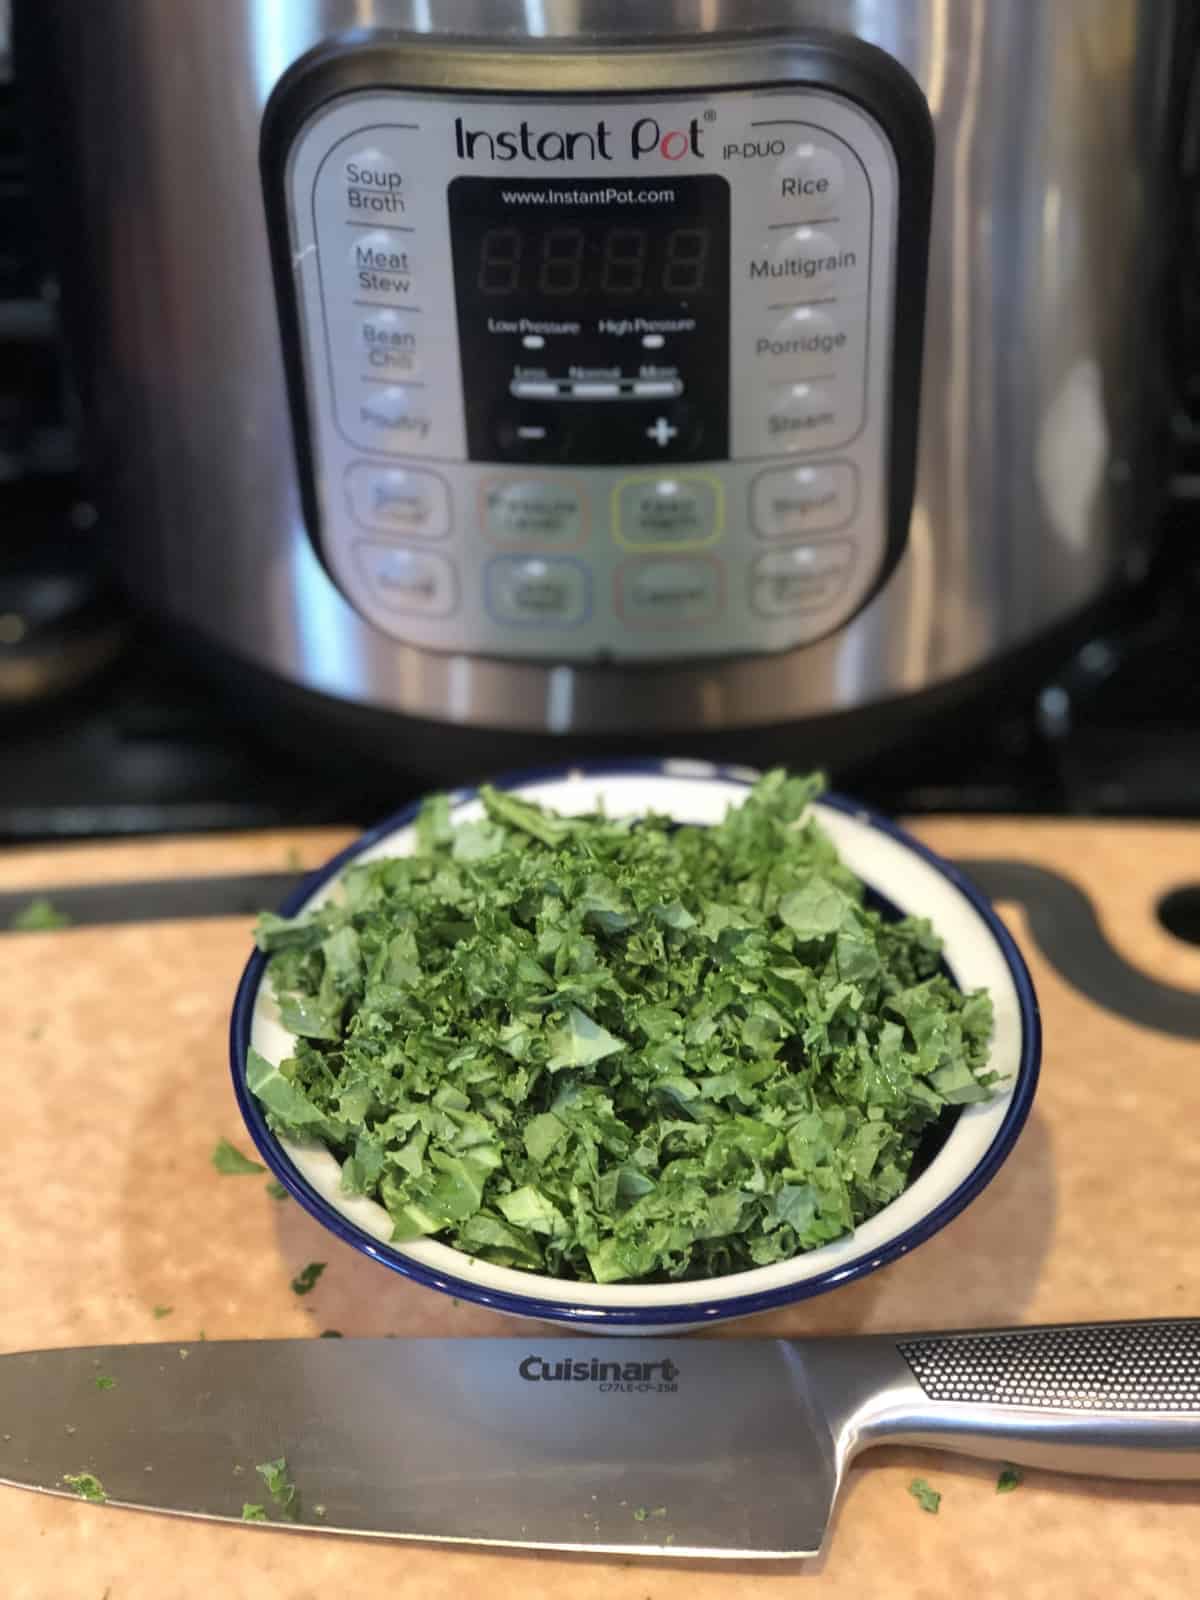 The Instant Pot and a bowl of Kale